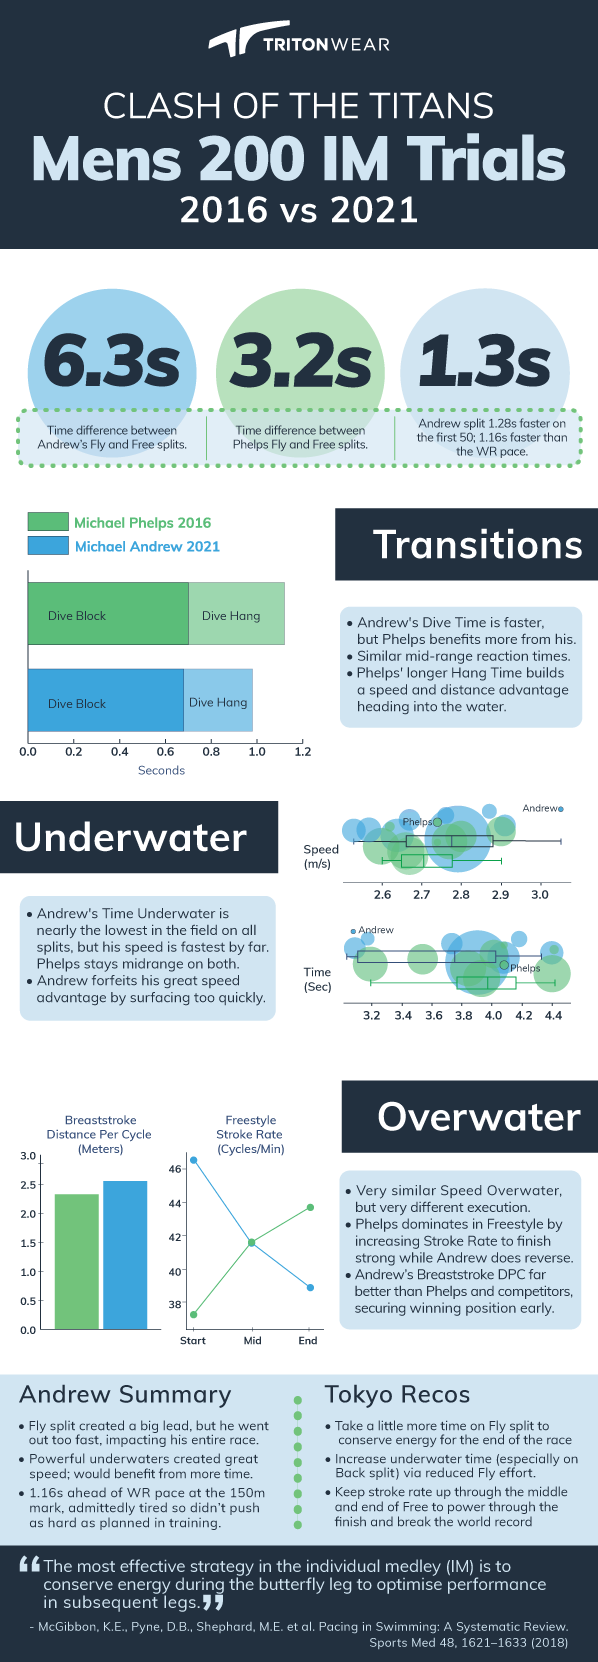 OlympicTrials_Infographic1_TitansClash_Final_2